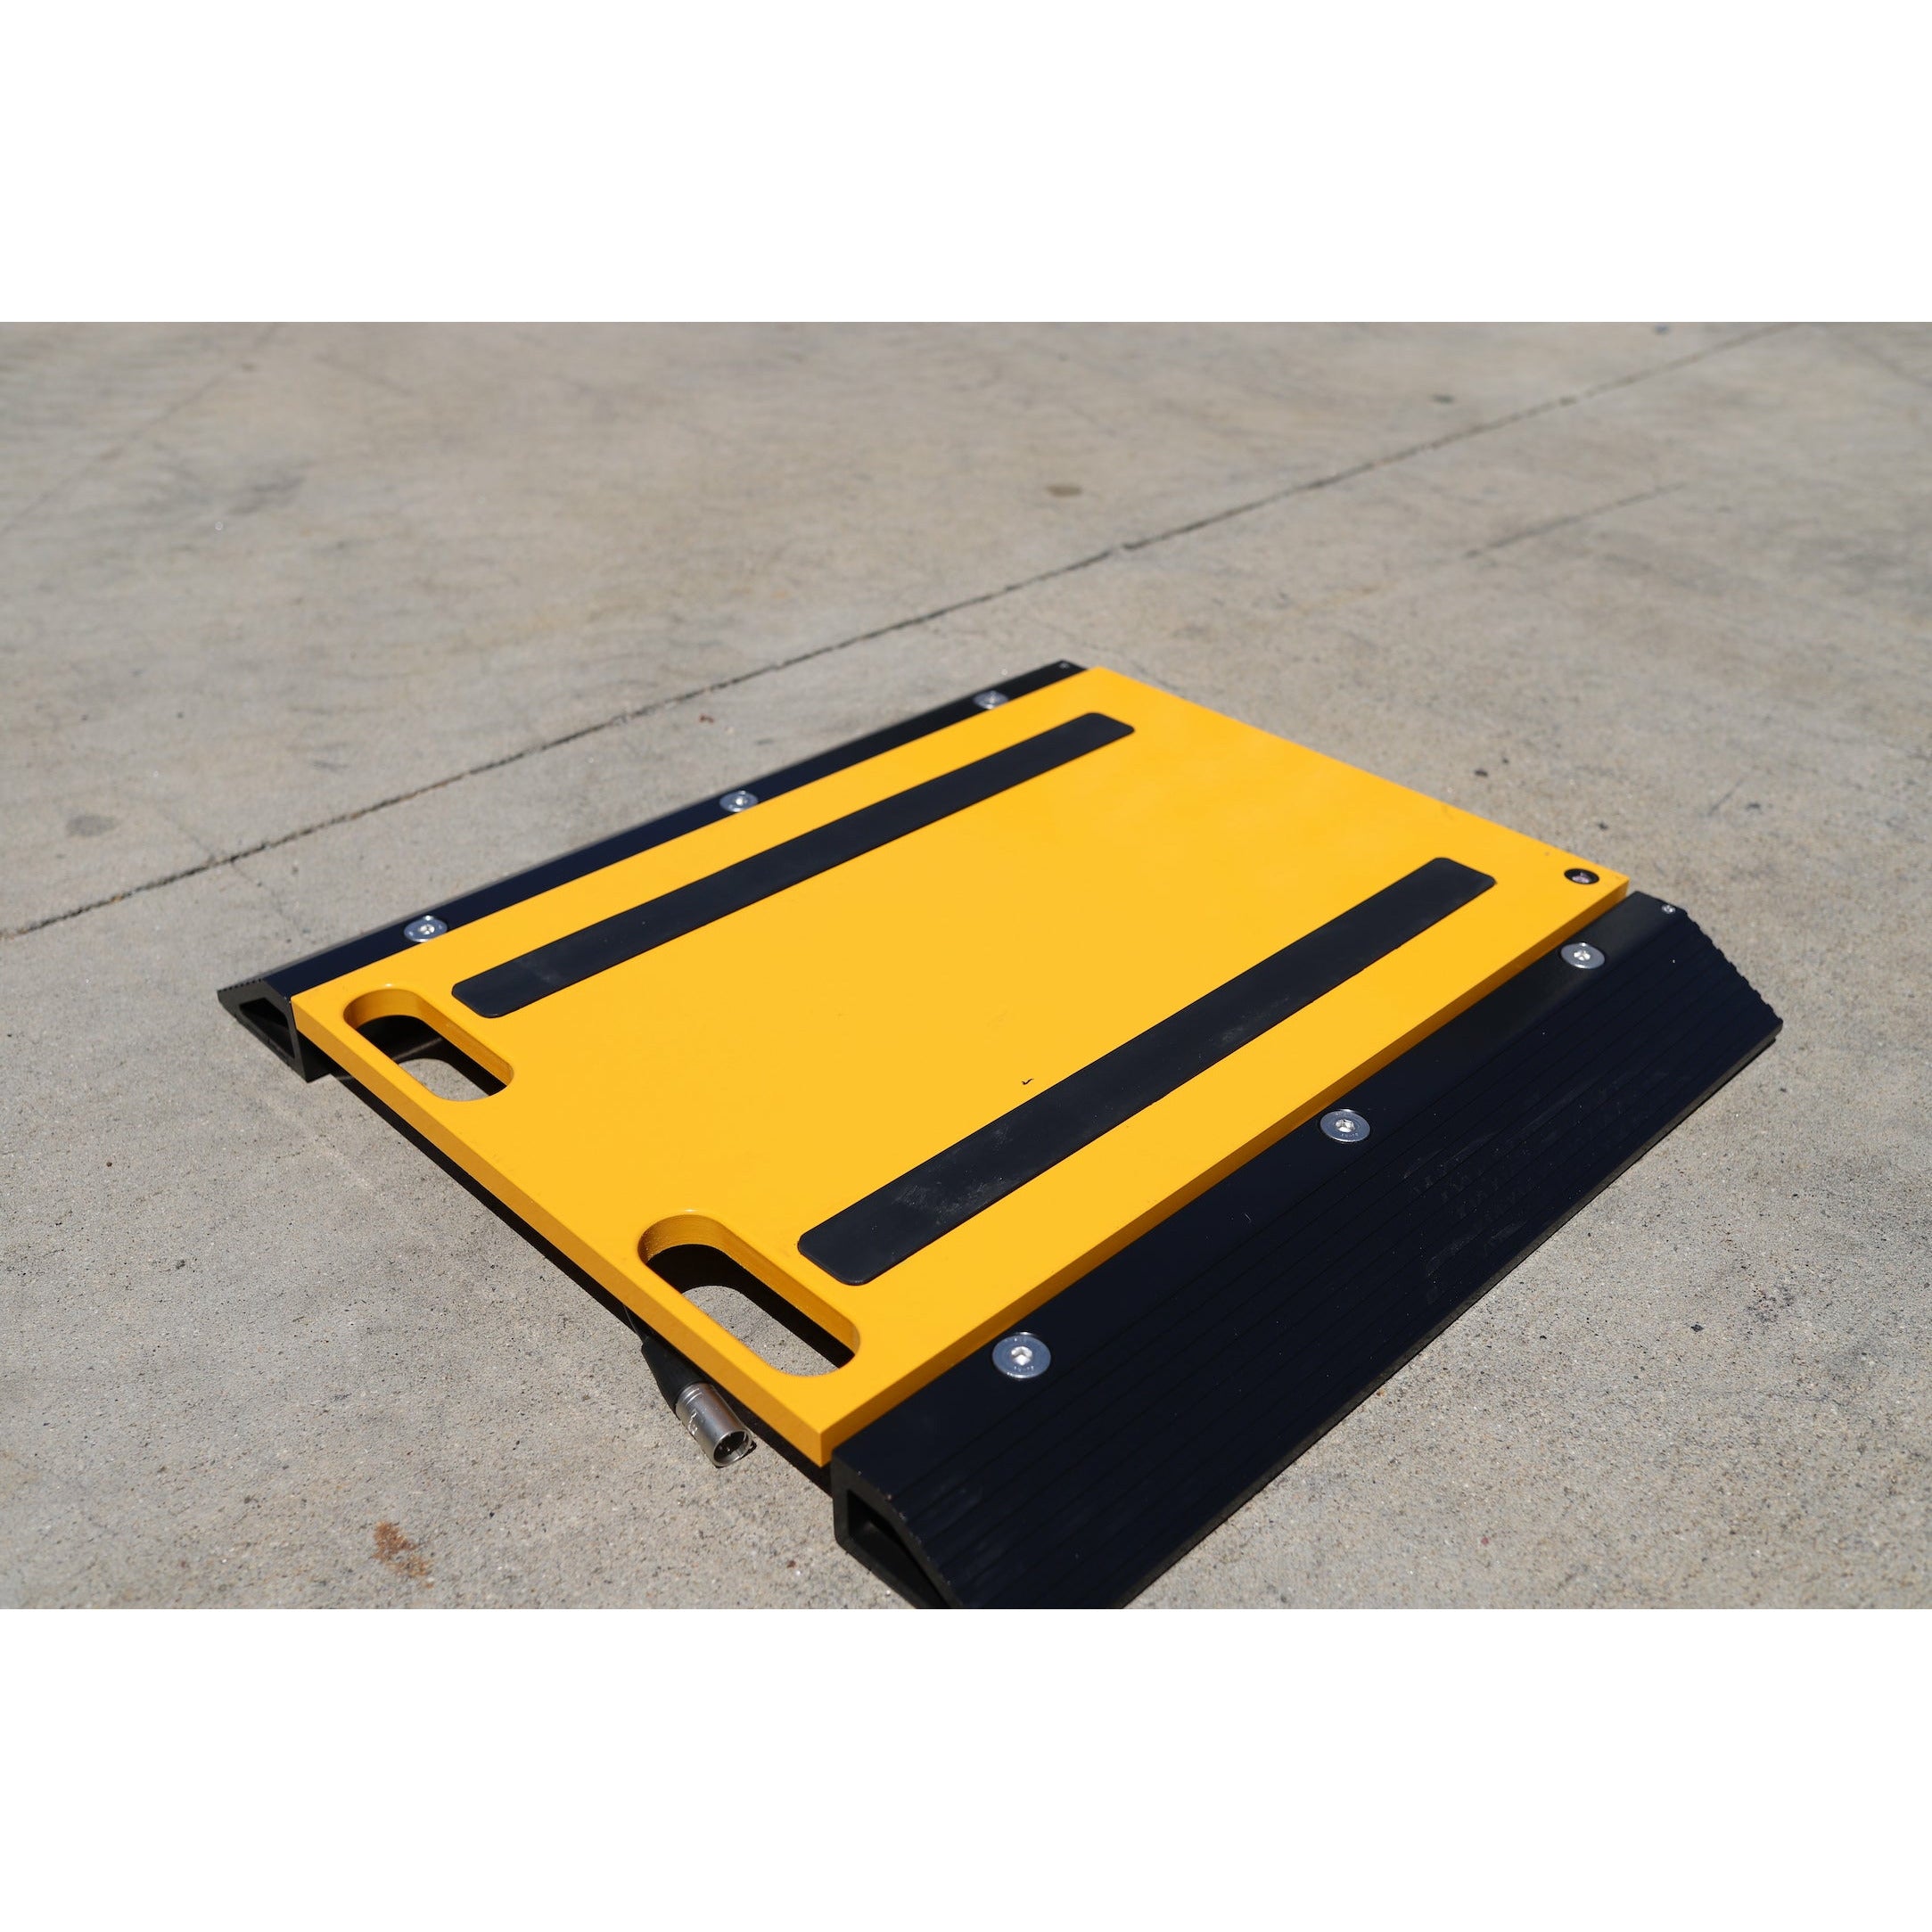 Liberty LS-928-1624 Portable Weigh Pads & Printer 2 Weigh Pad System with 50.000 lb Capacity & LS-7561 Indicator